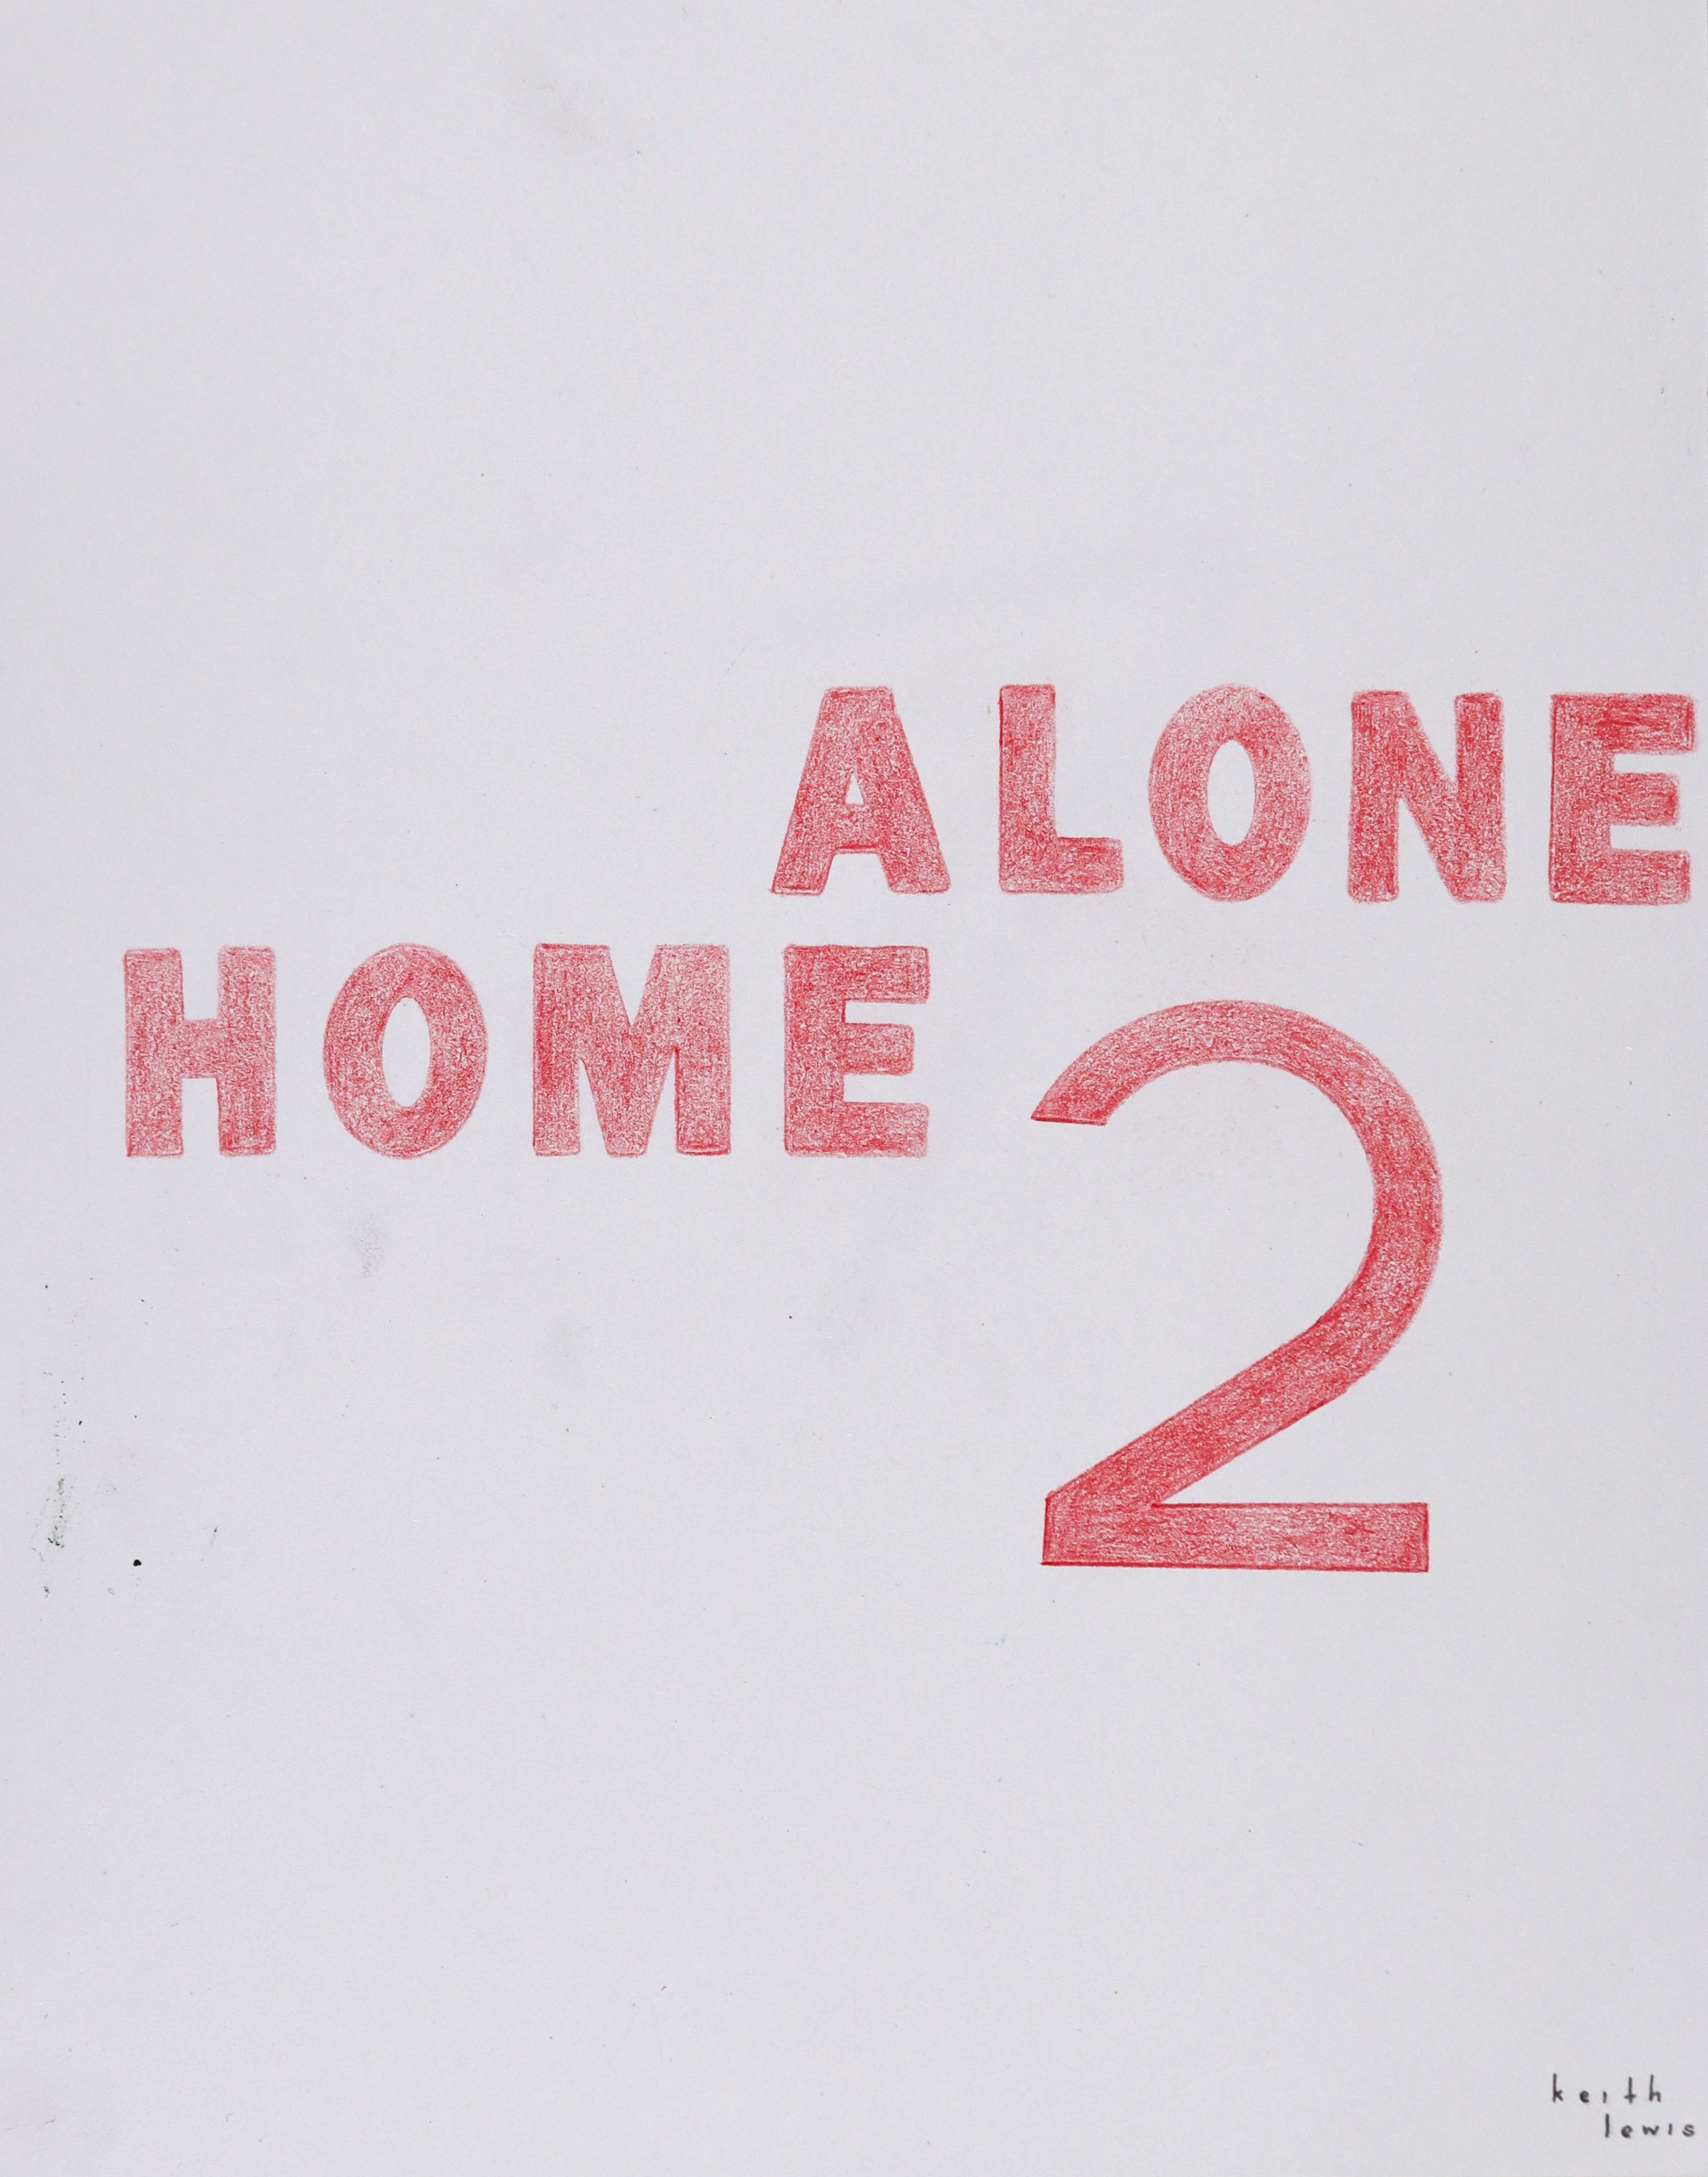 Home Alone 2 by Keith Lewis